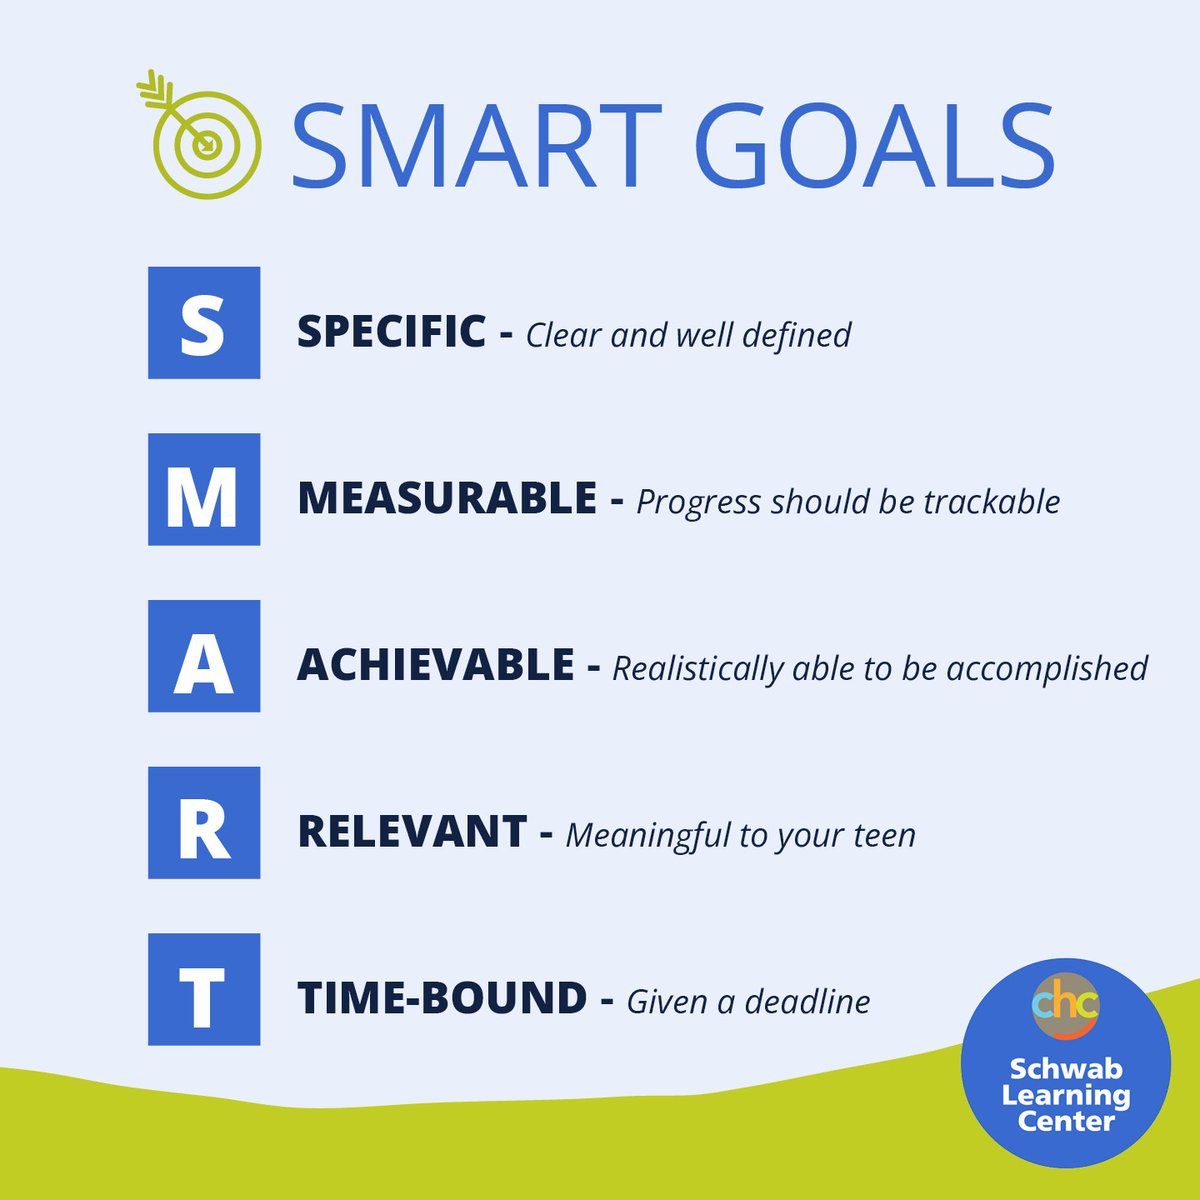 When you empower your teen to set and meet their own goals, you're helping them develop valuable executive functioning skills that they'll use all their lives. 

SMART goals can help them get there.
.
@SchwabLearningCenteratCHC @SLCatCHC @CHC #ExecutiveFunctioning #ADHD #Dyslexia